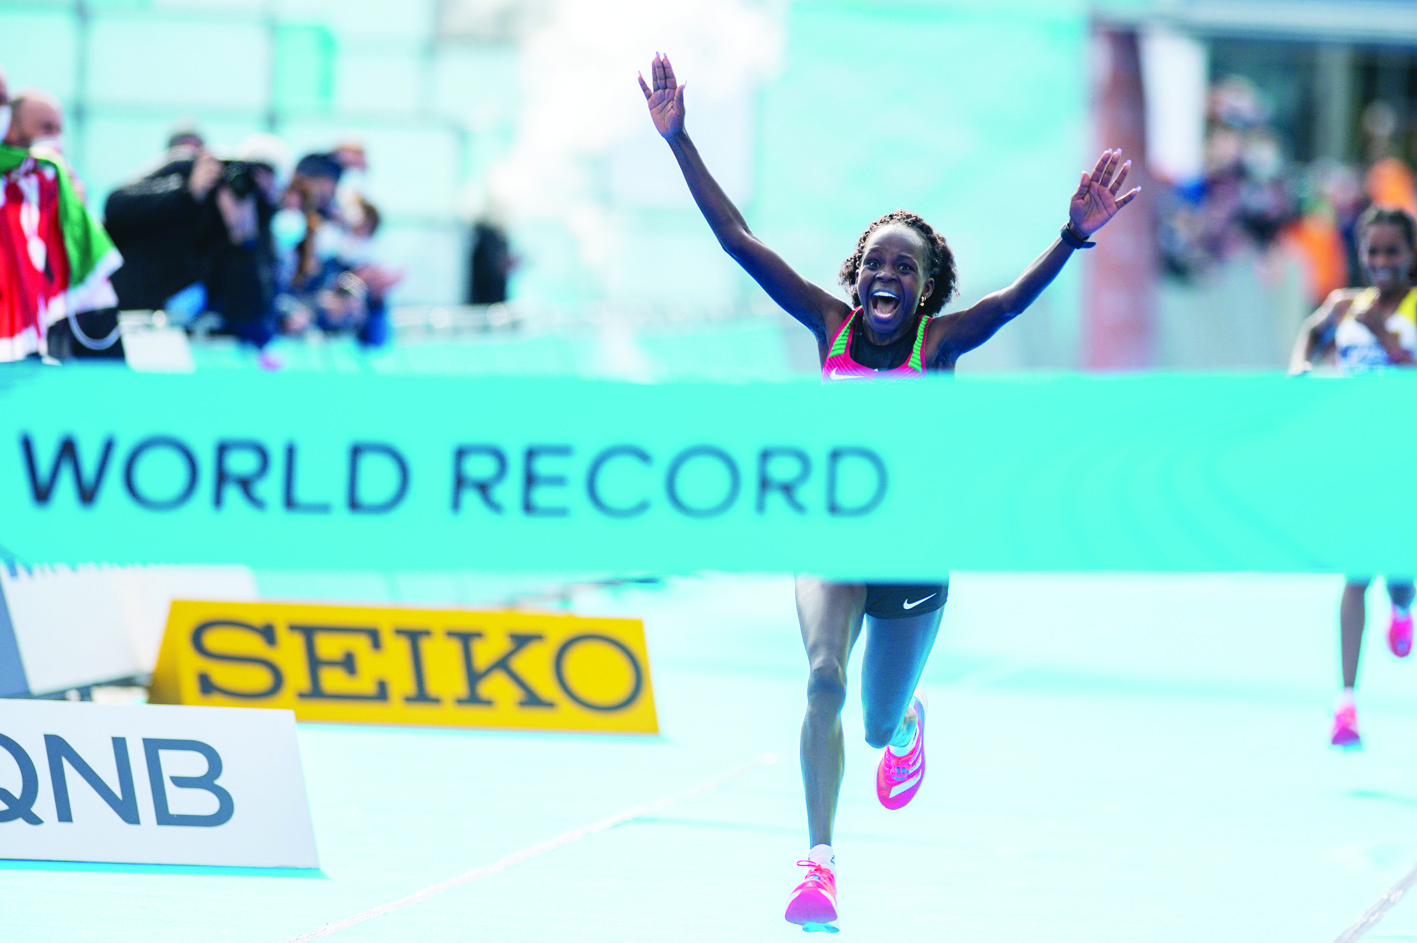 Peres Jepchirchir of Kenya beats the World Record (1:05:16) and wins the women's race of the 2020 IAAF World Half Marathon Championships in Gdynia, Poland, in October 17, 2020. (Photo by MATEUSZ SLODKOWSKI / AFP)